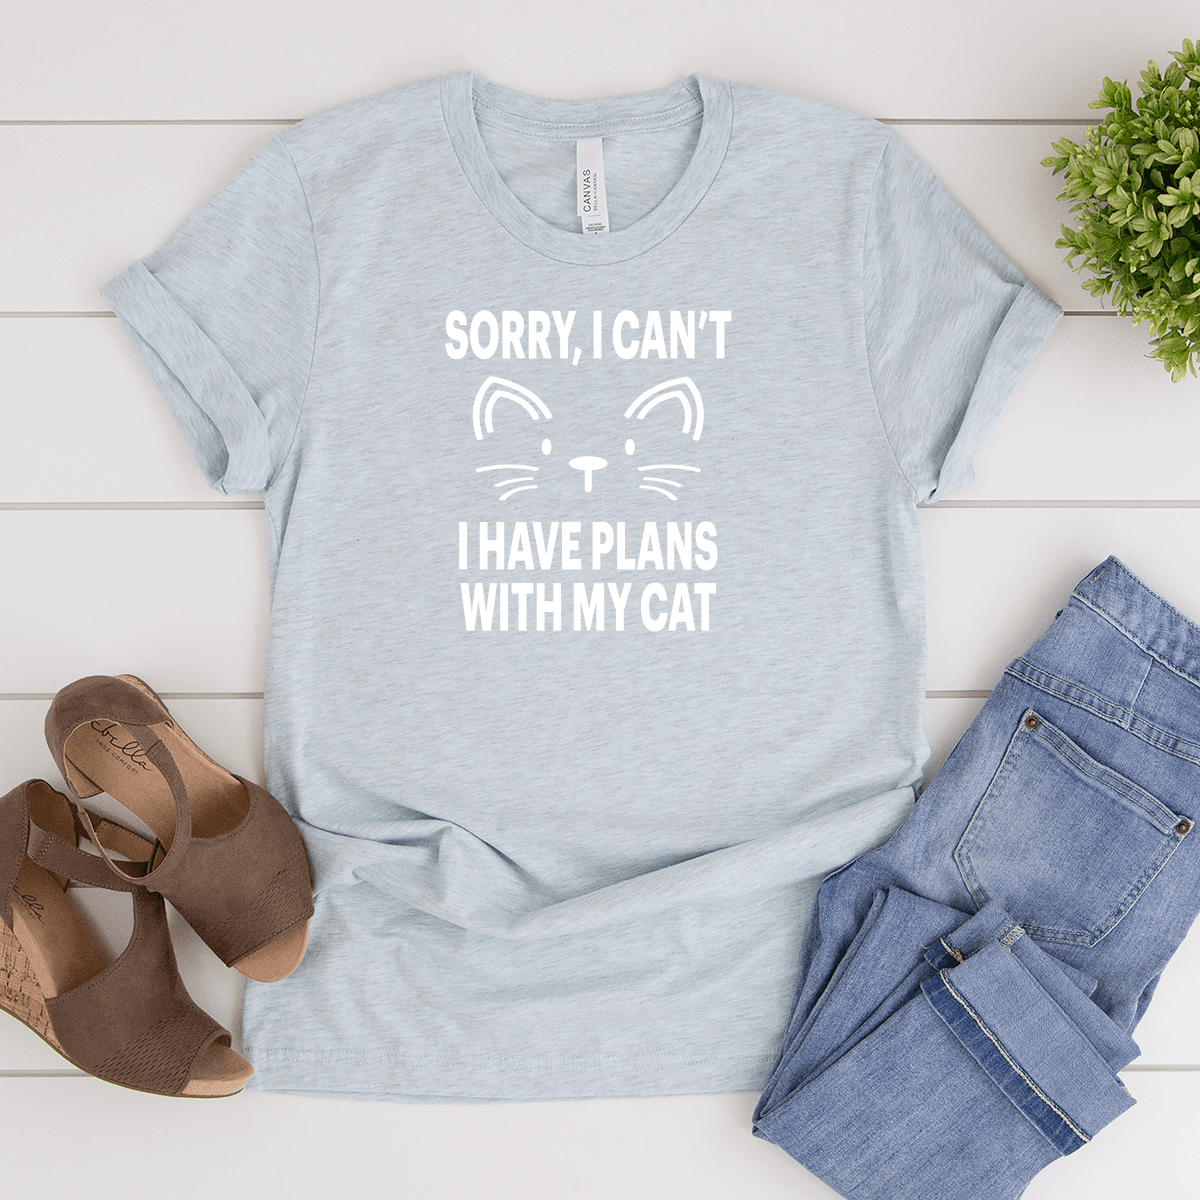 Sorry I Can't. I Have Plans With My Cat - Bella+Canvas Tee